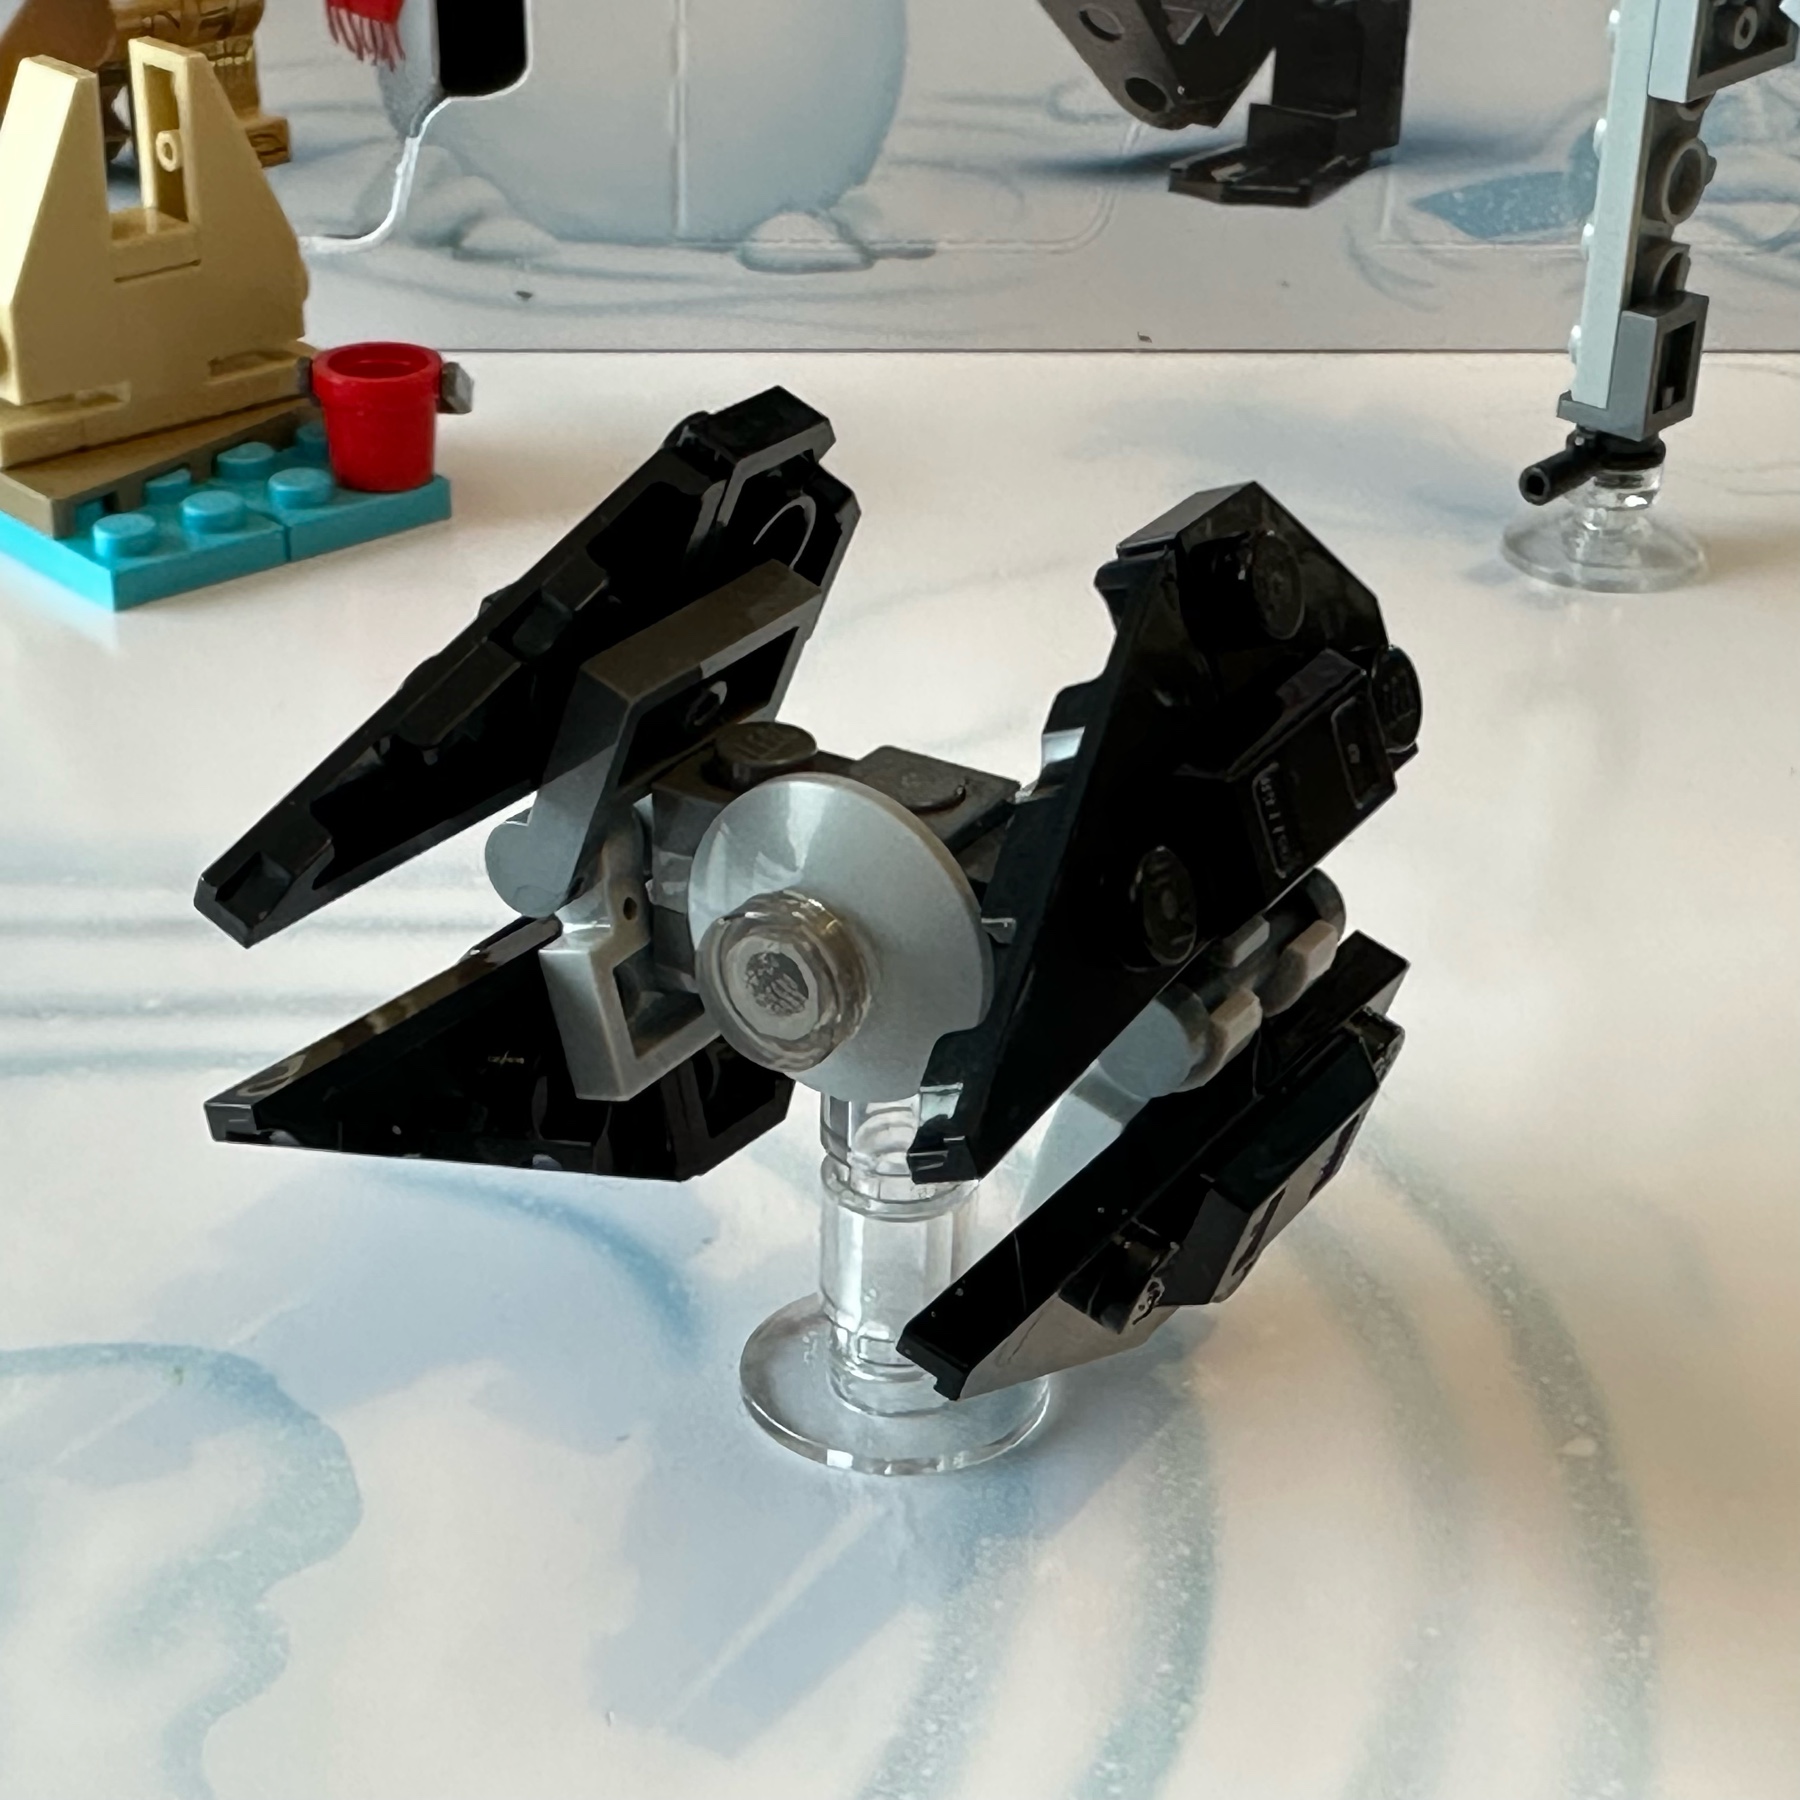 LEGO micro-scale model of a TIE Interceptor spaceship from Star Wars.